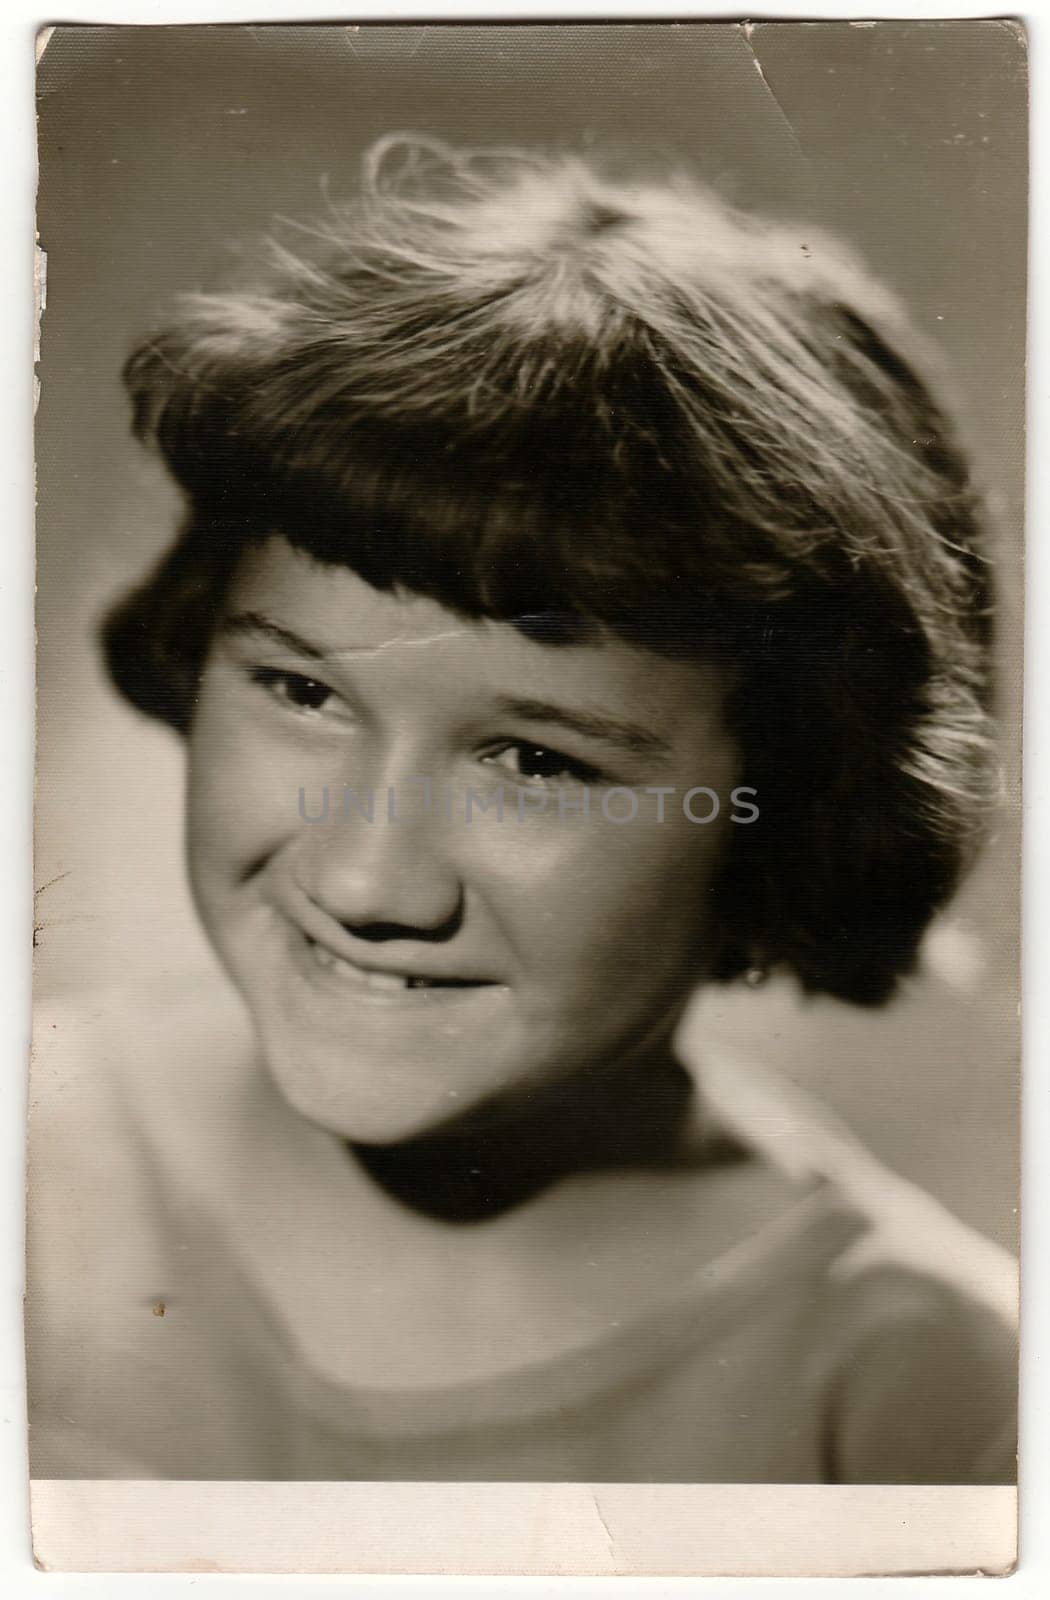 Vintage photo shows young girl. by roman_nerud